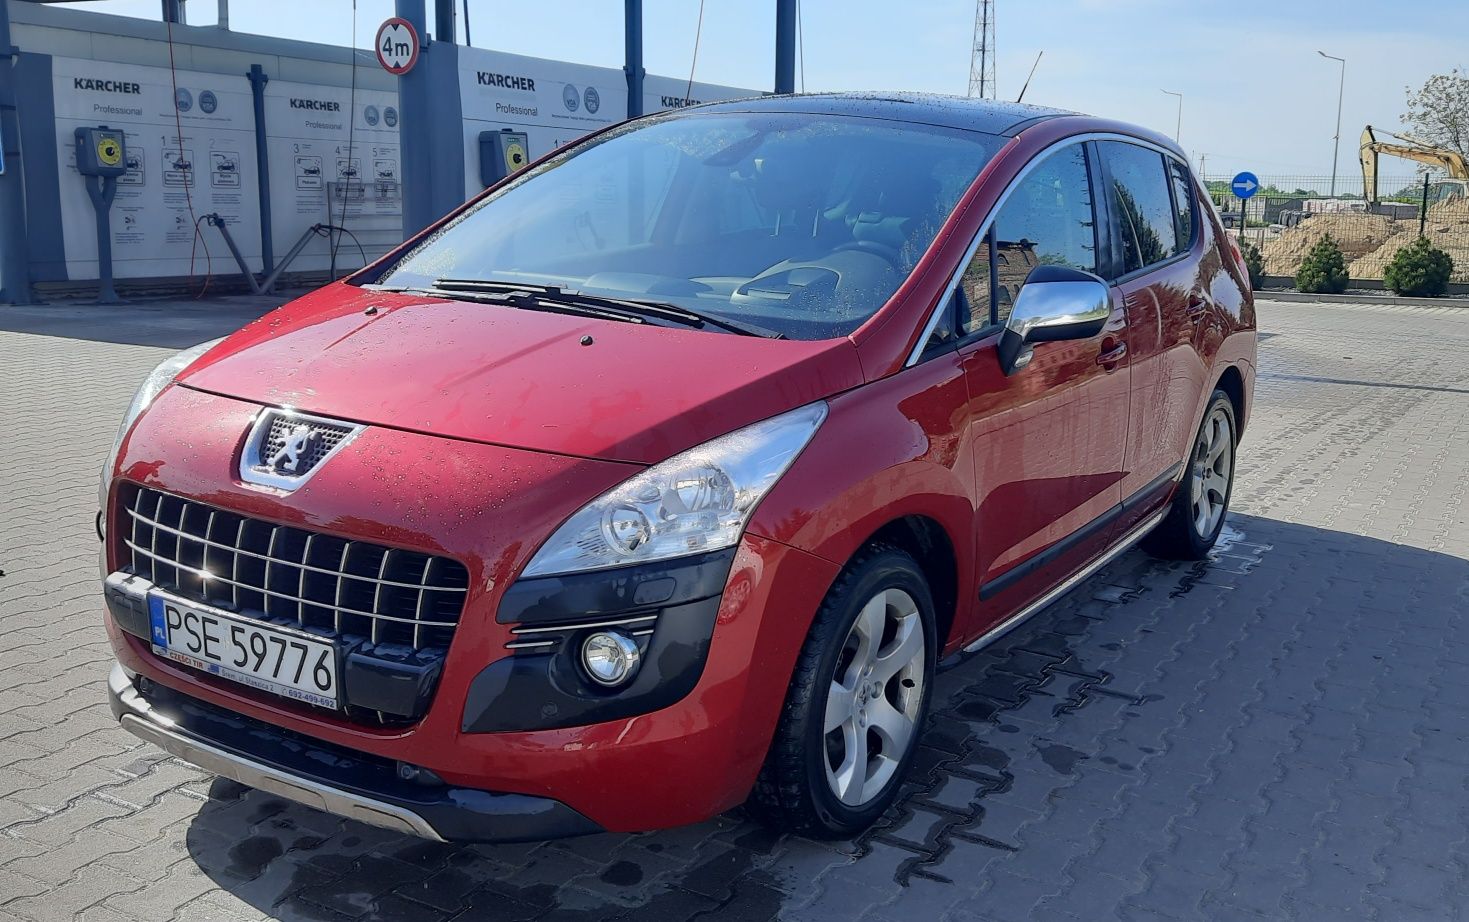 Peugeot 3008 1.6 benzyna, automat, panoramiczny dach. 2011 rok.